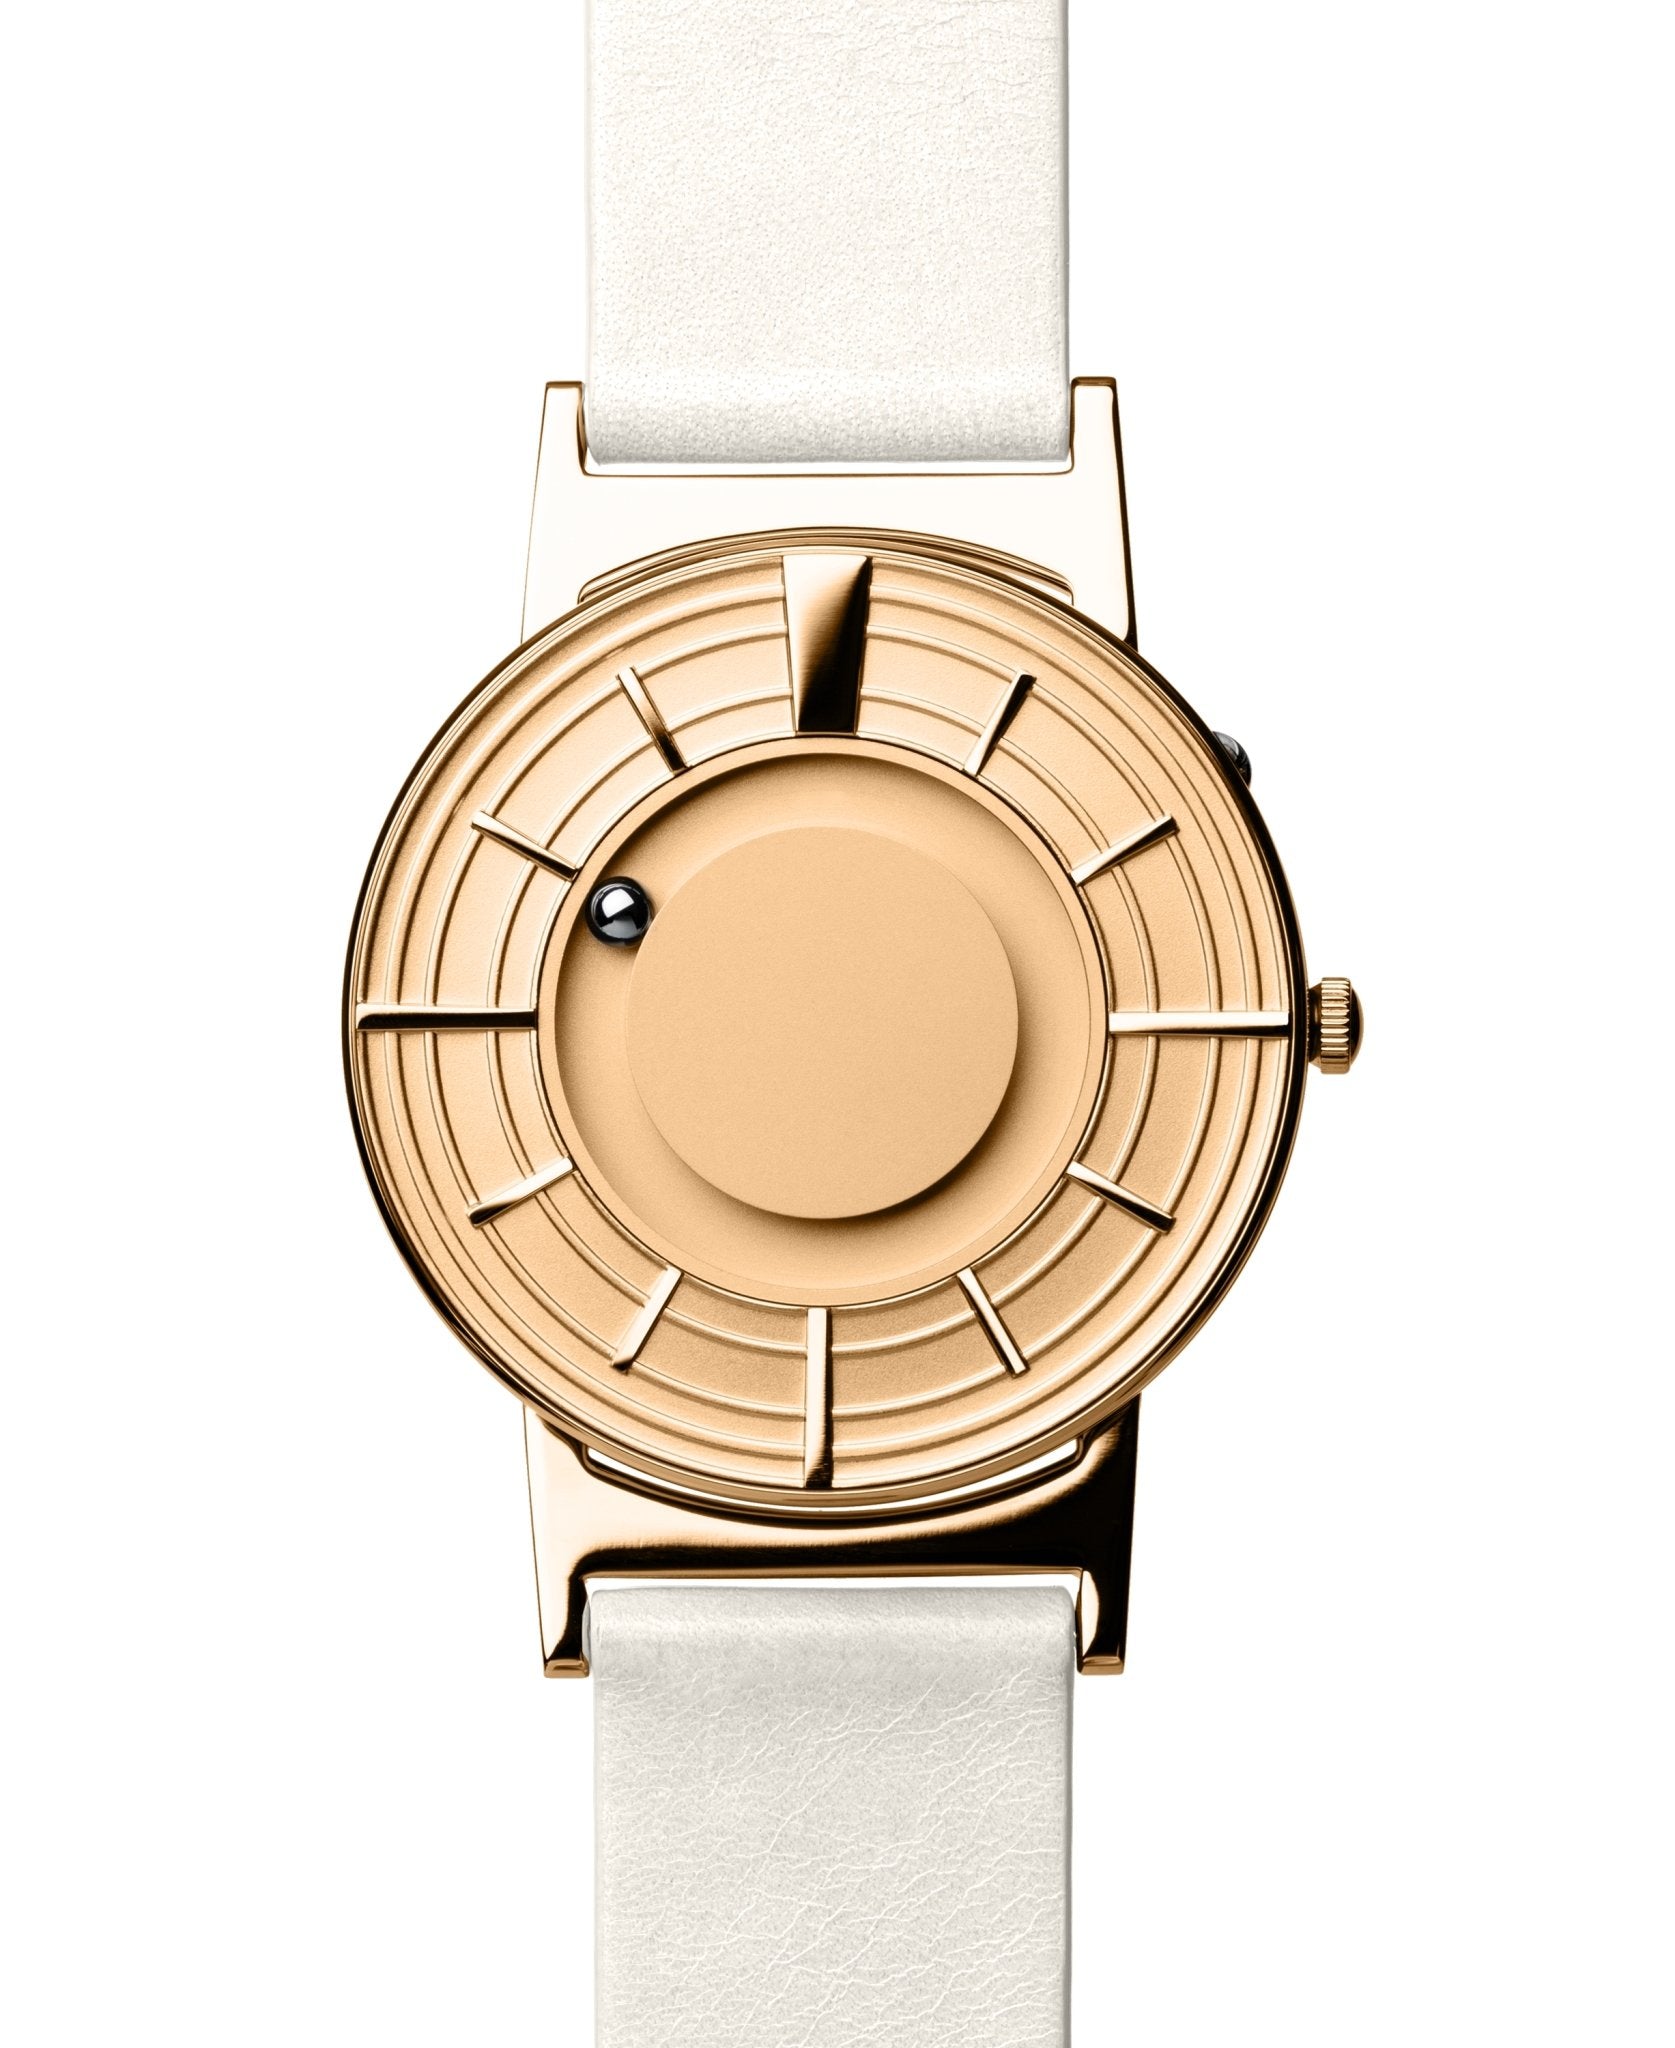 Eone Bradley Edge Rose Gold - Watches & Crystals